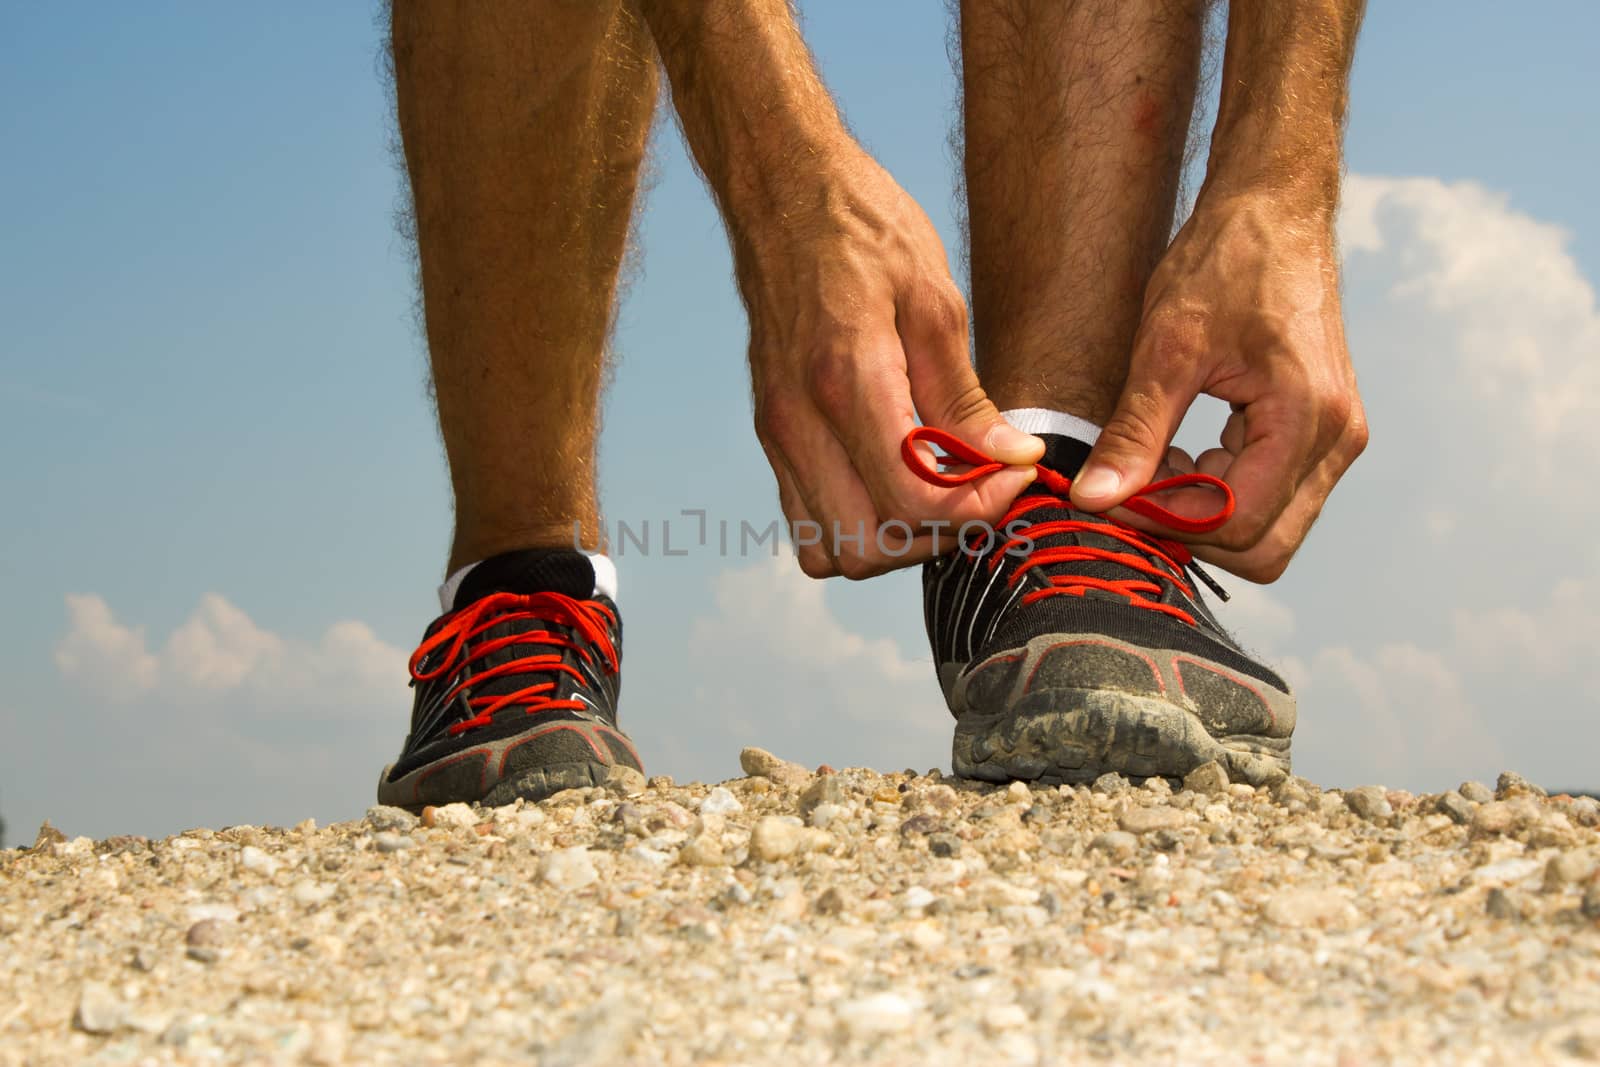 Runner tying shoelaces by Madrolly